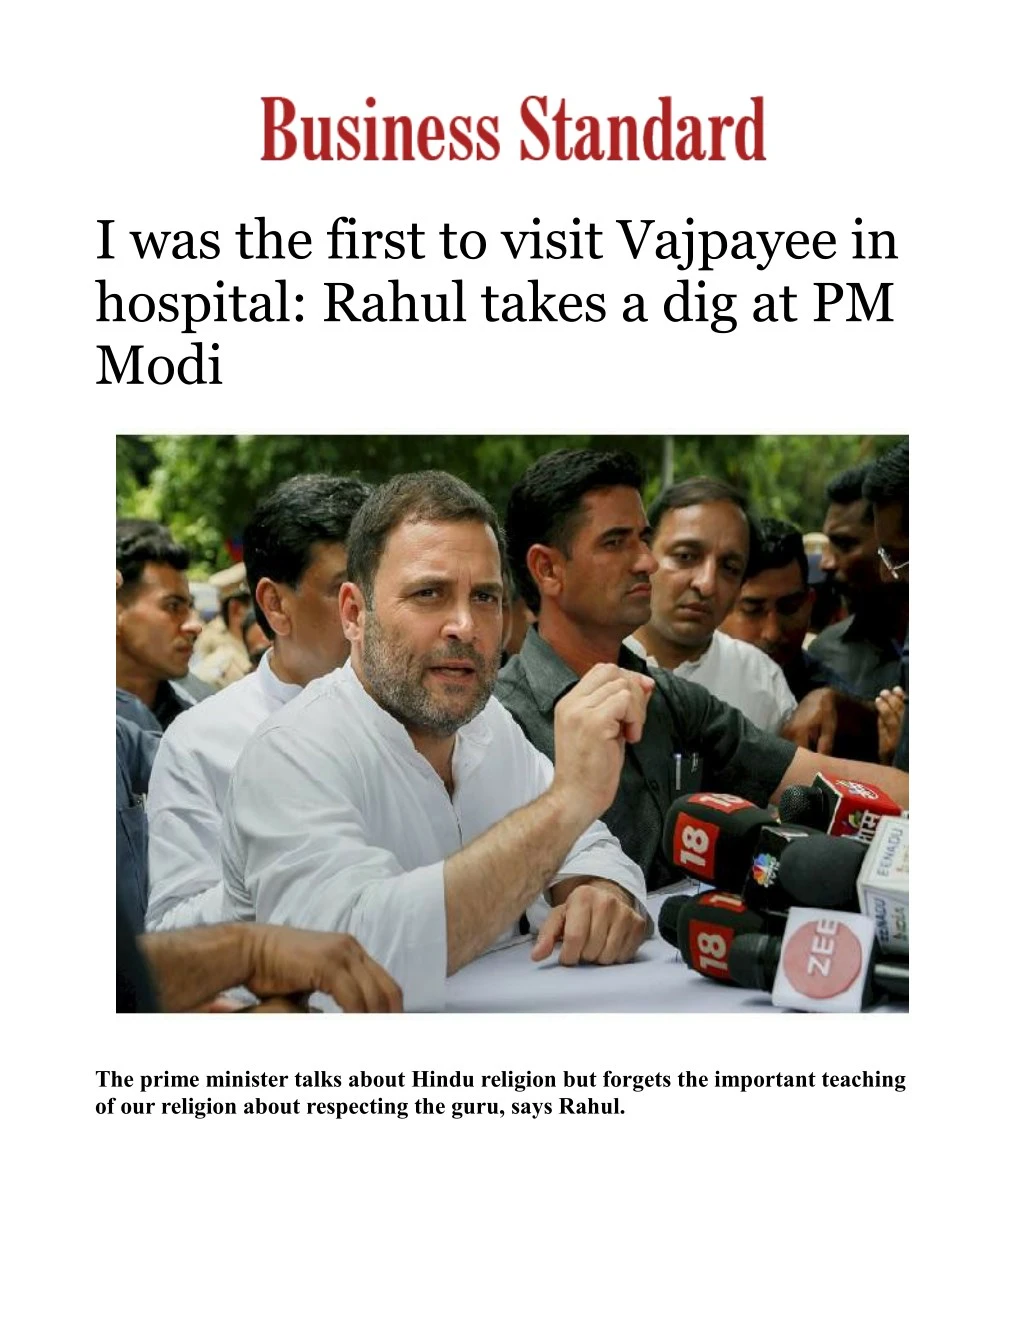 i was the first to visit vajpayee in hospital